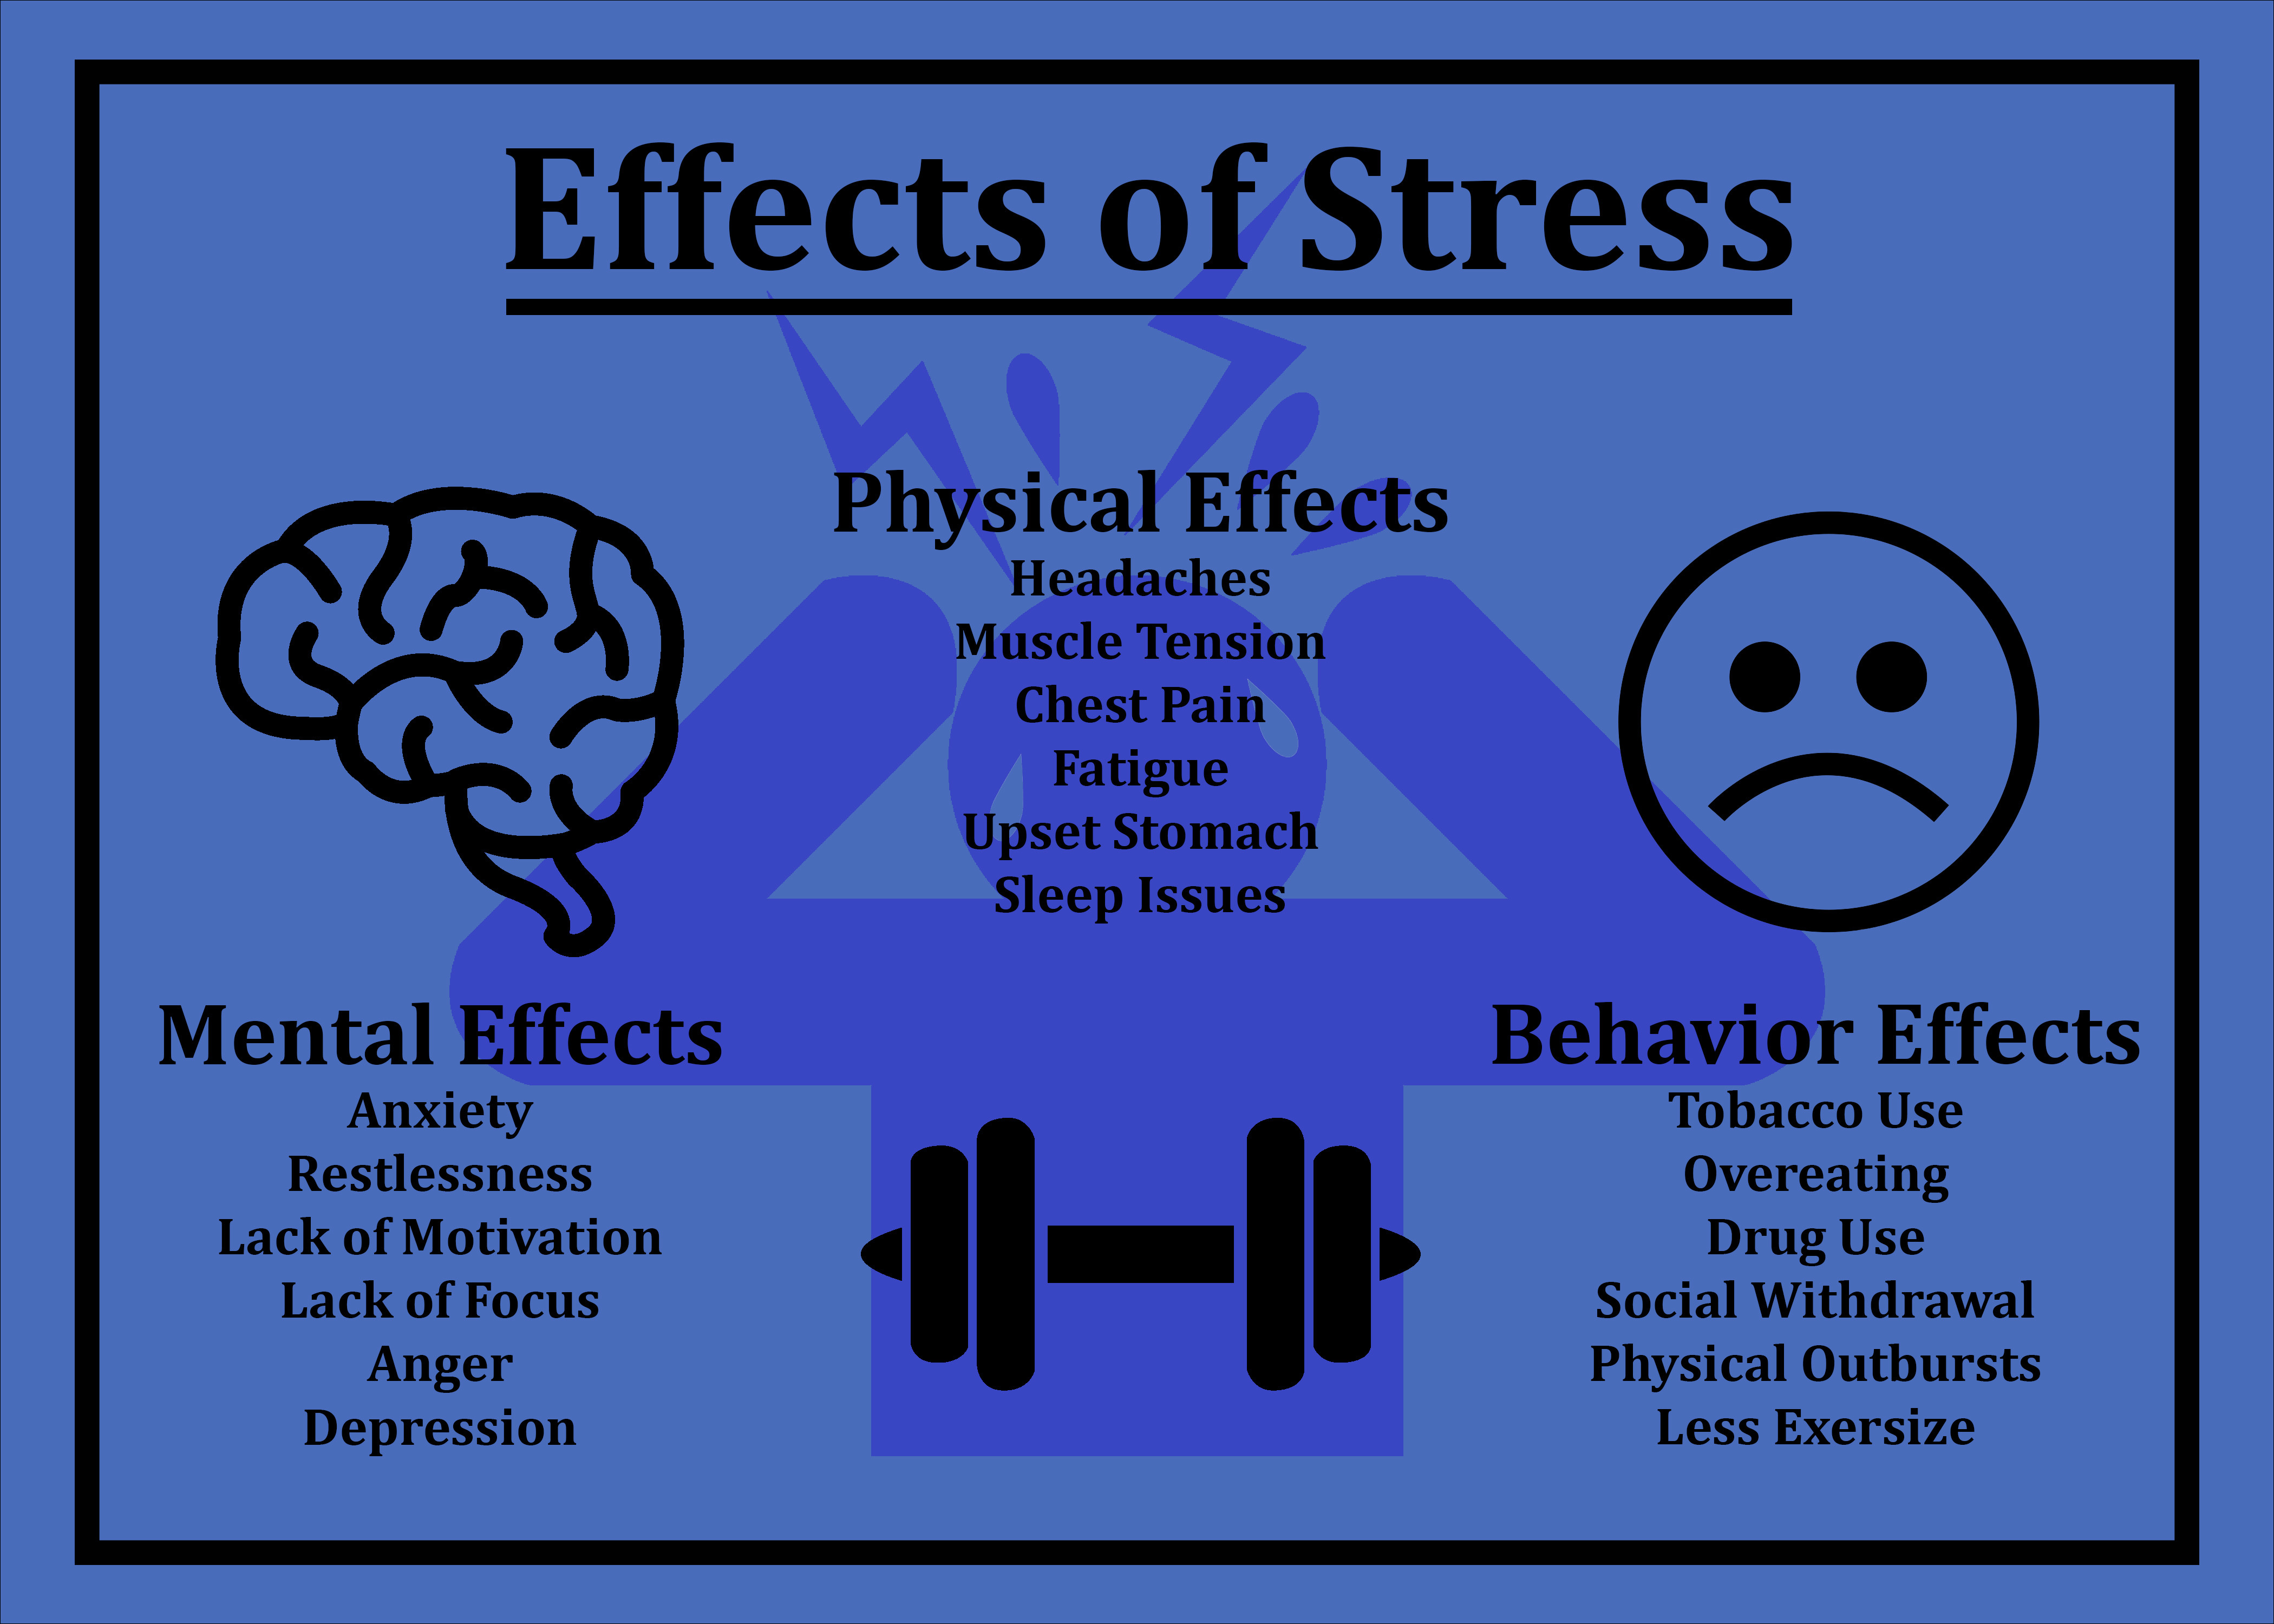 Effects of Stress on your Body